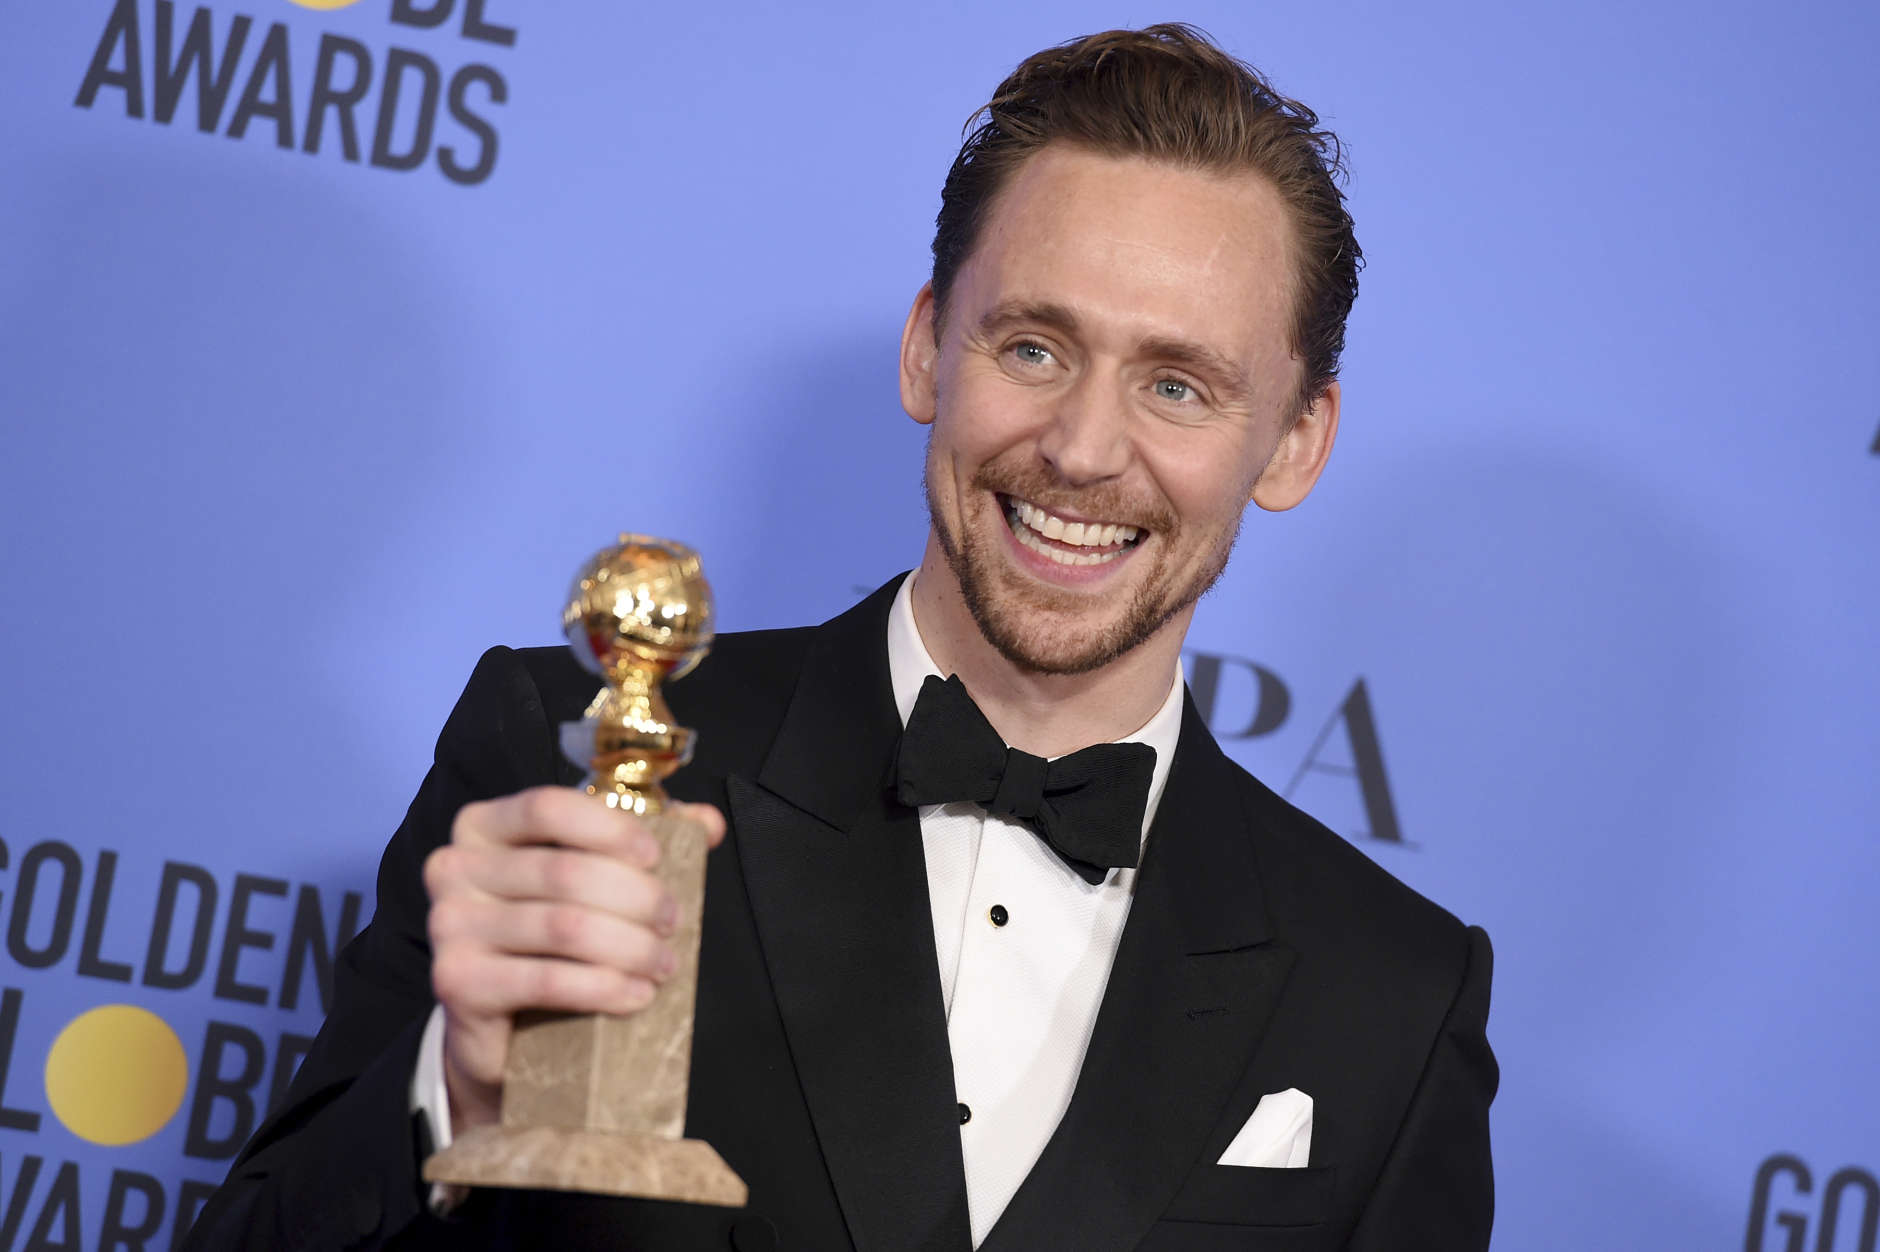 Tom Hiddleston poses in the press room with the award for best performance by an actor in a limited series or a motion picture made for television for "The Night Manager" at the 74th annual Golden Globe Awards at the Beverly Hilton Hotel on Sunday, Jan. 8, 2017, in Beverly Hills, Calif. (Photo by Jordan Strauss/Invision/AP)